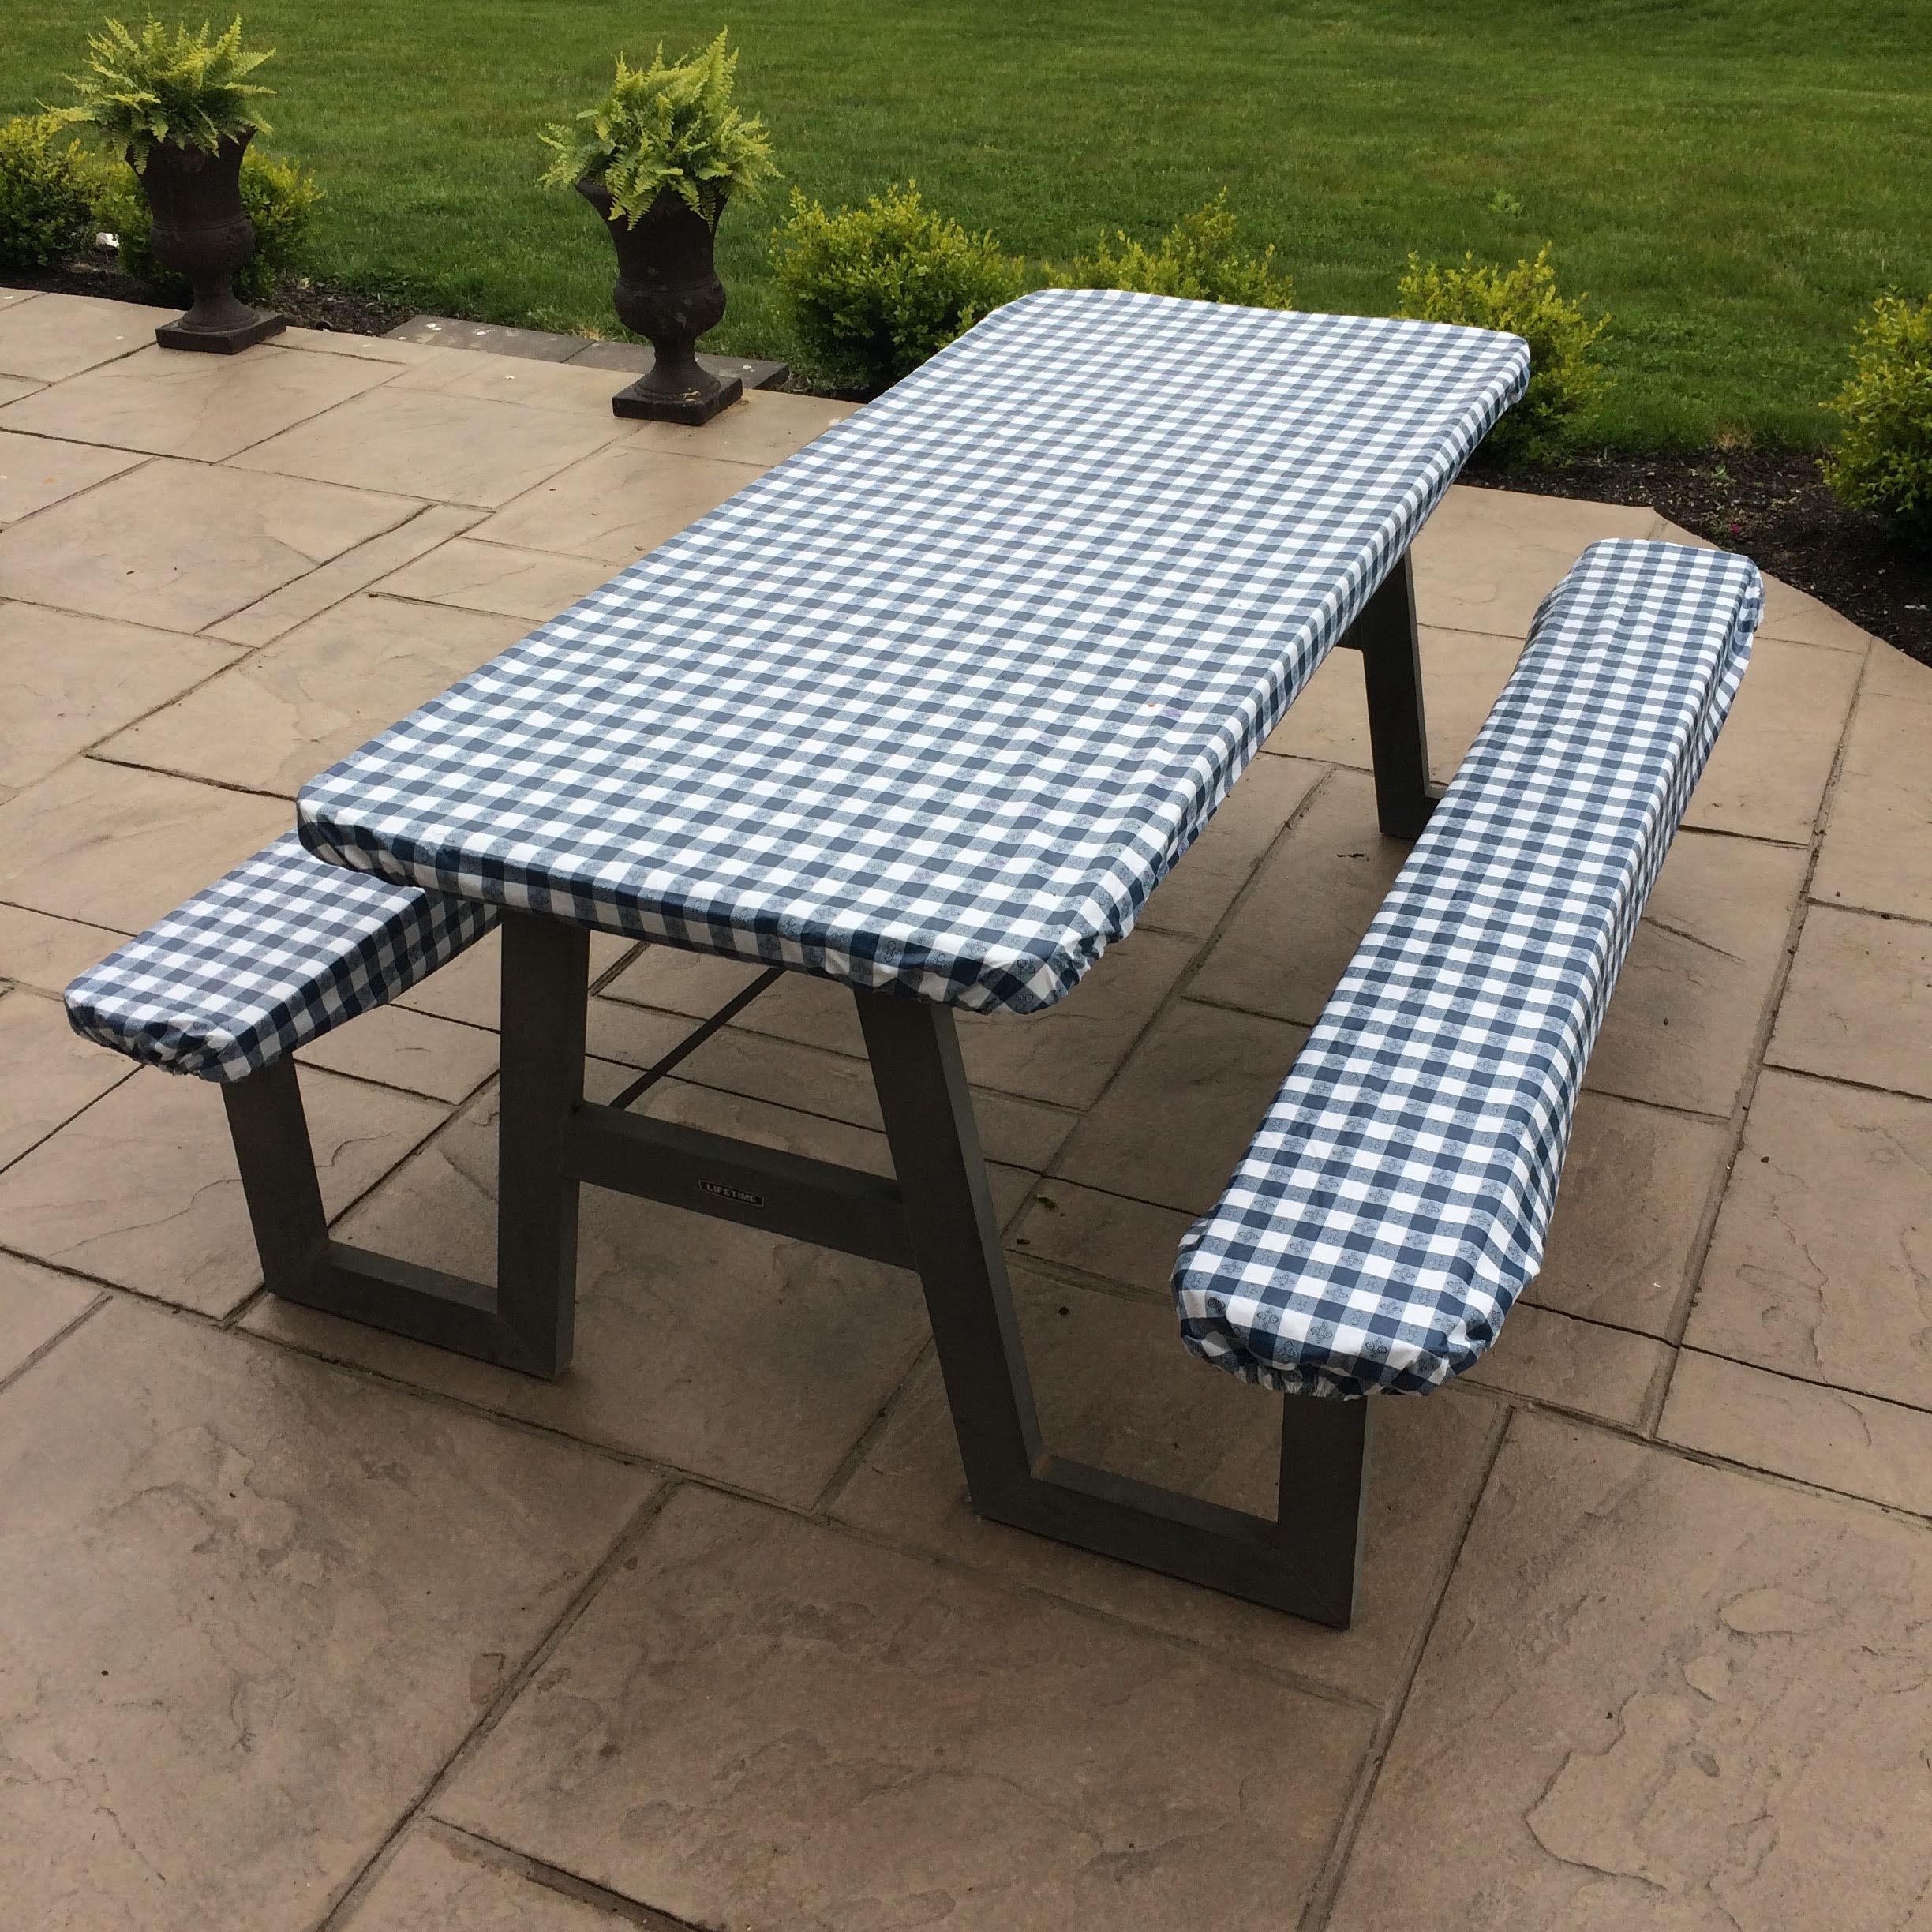 28 x 72 Inch 3 Piece Set Waterproof Picnic Table and Bench Seat Covers with Elastic Edges for Outdoor Patio Park Vinyl Picnic Tablecloths and Bench Covers Blue Checkered Flannel Backed Lining 